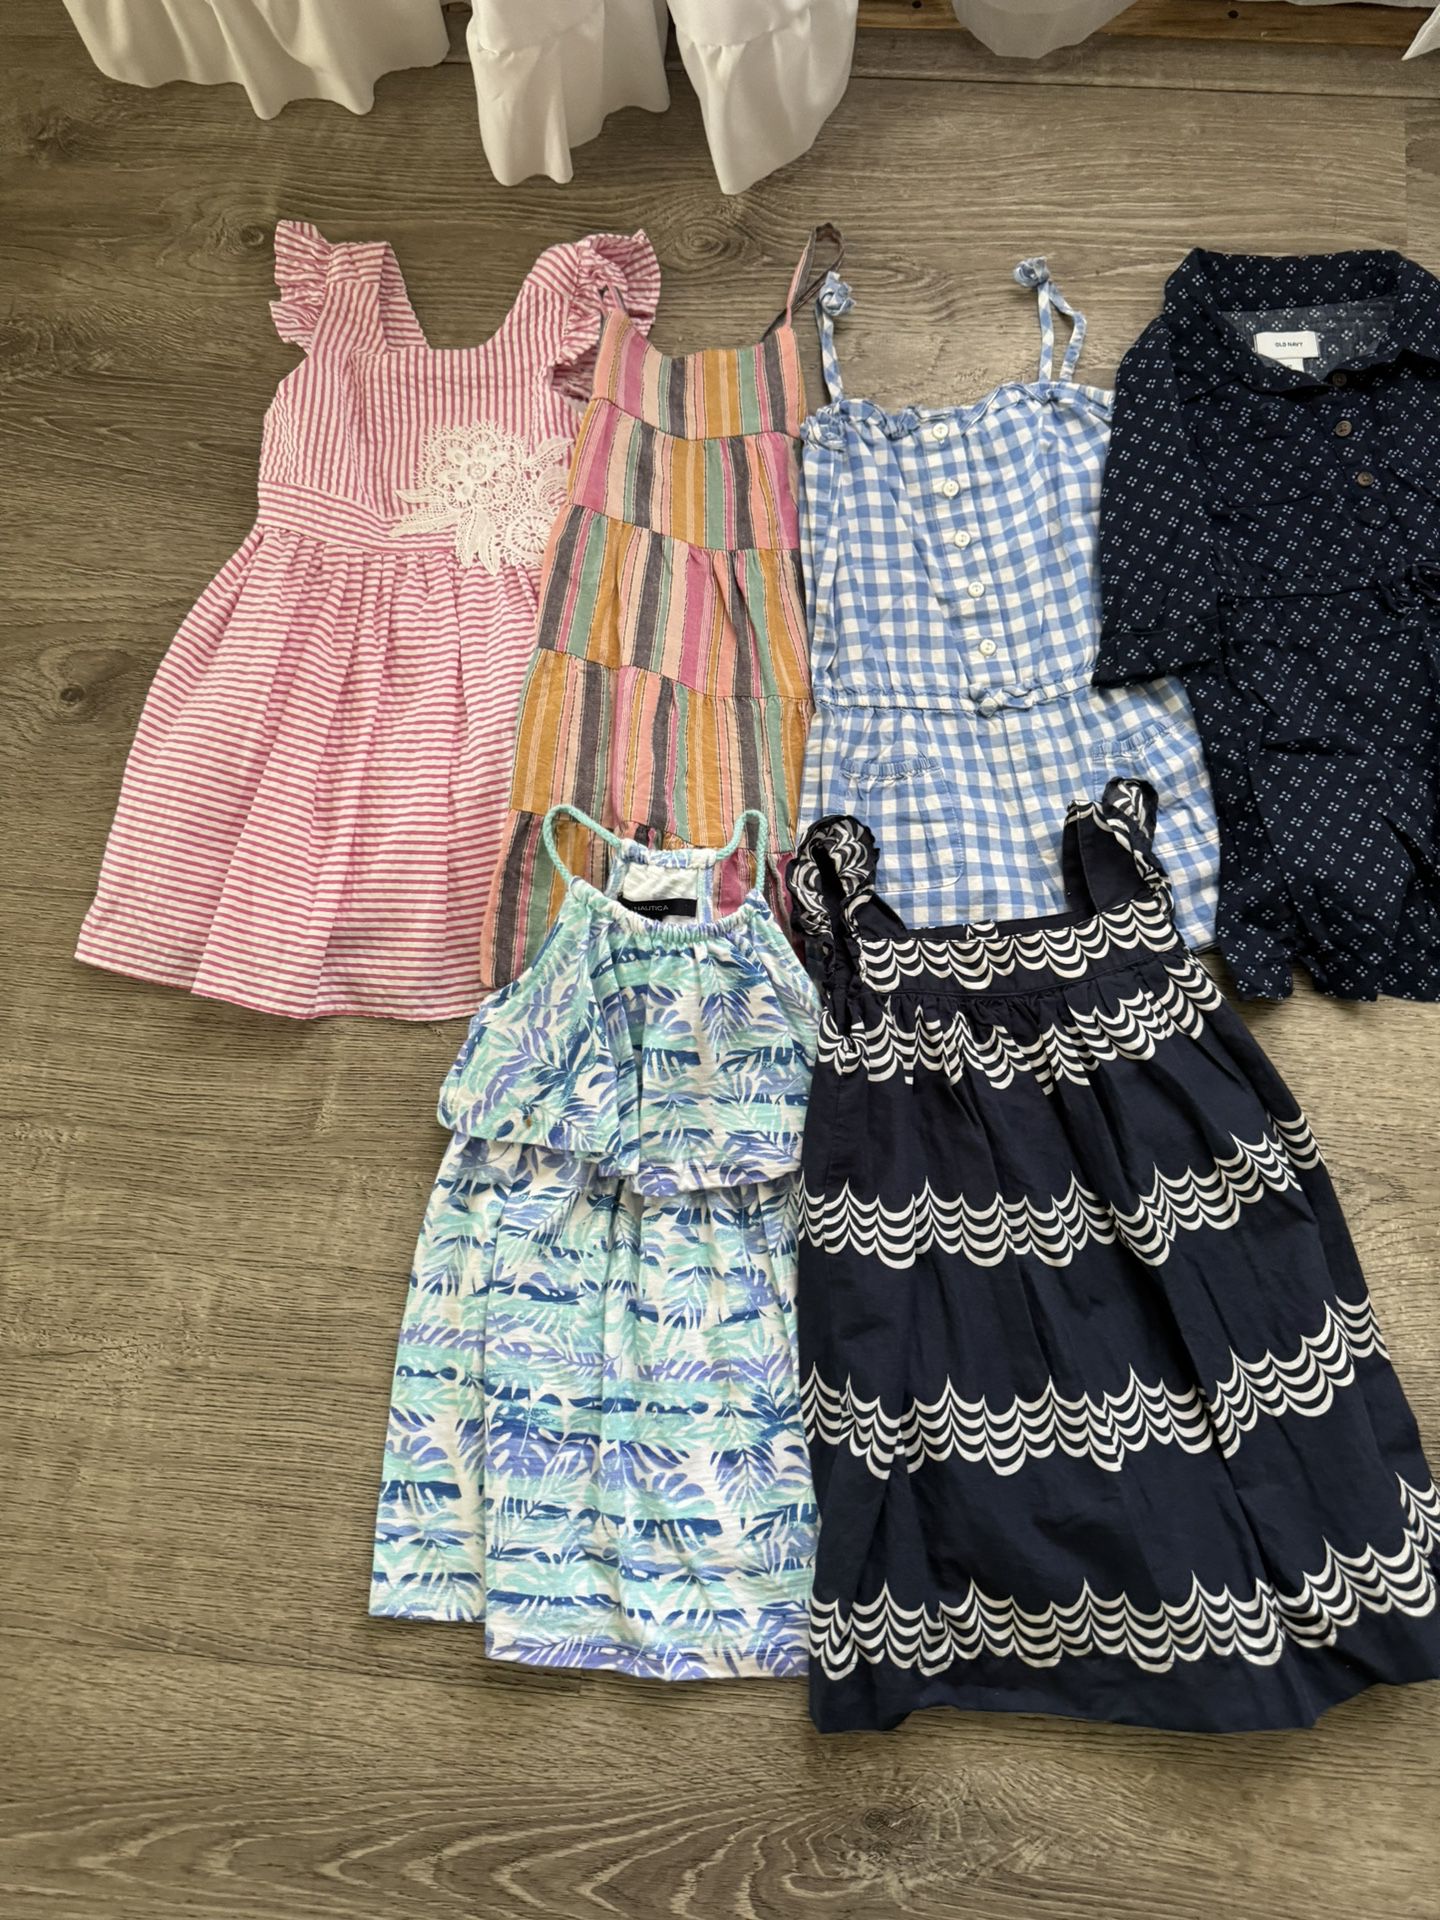 Size 2t Dresses $5 Each Or 2 For $8